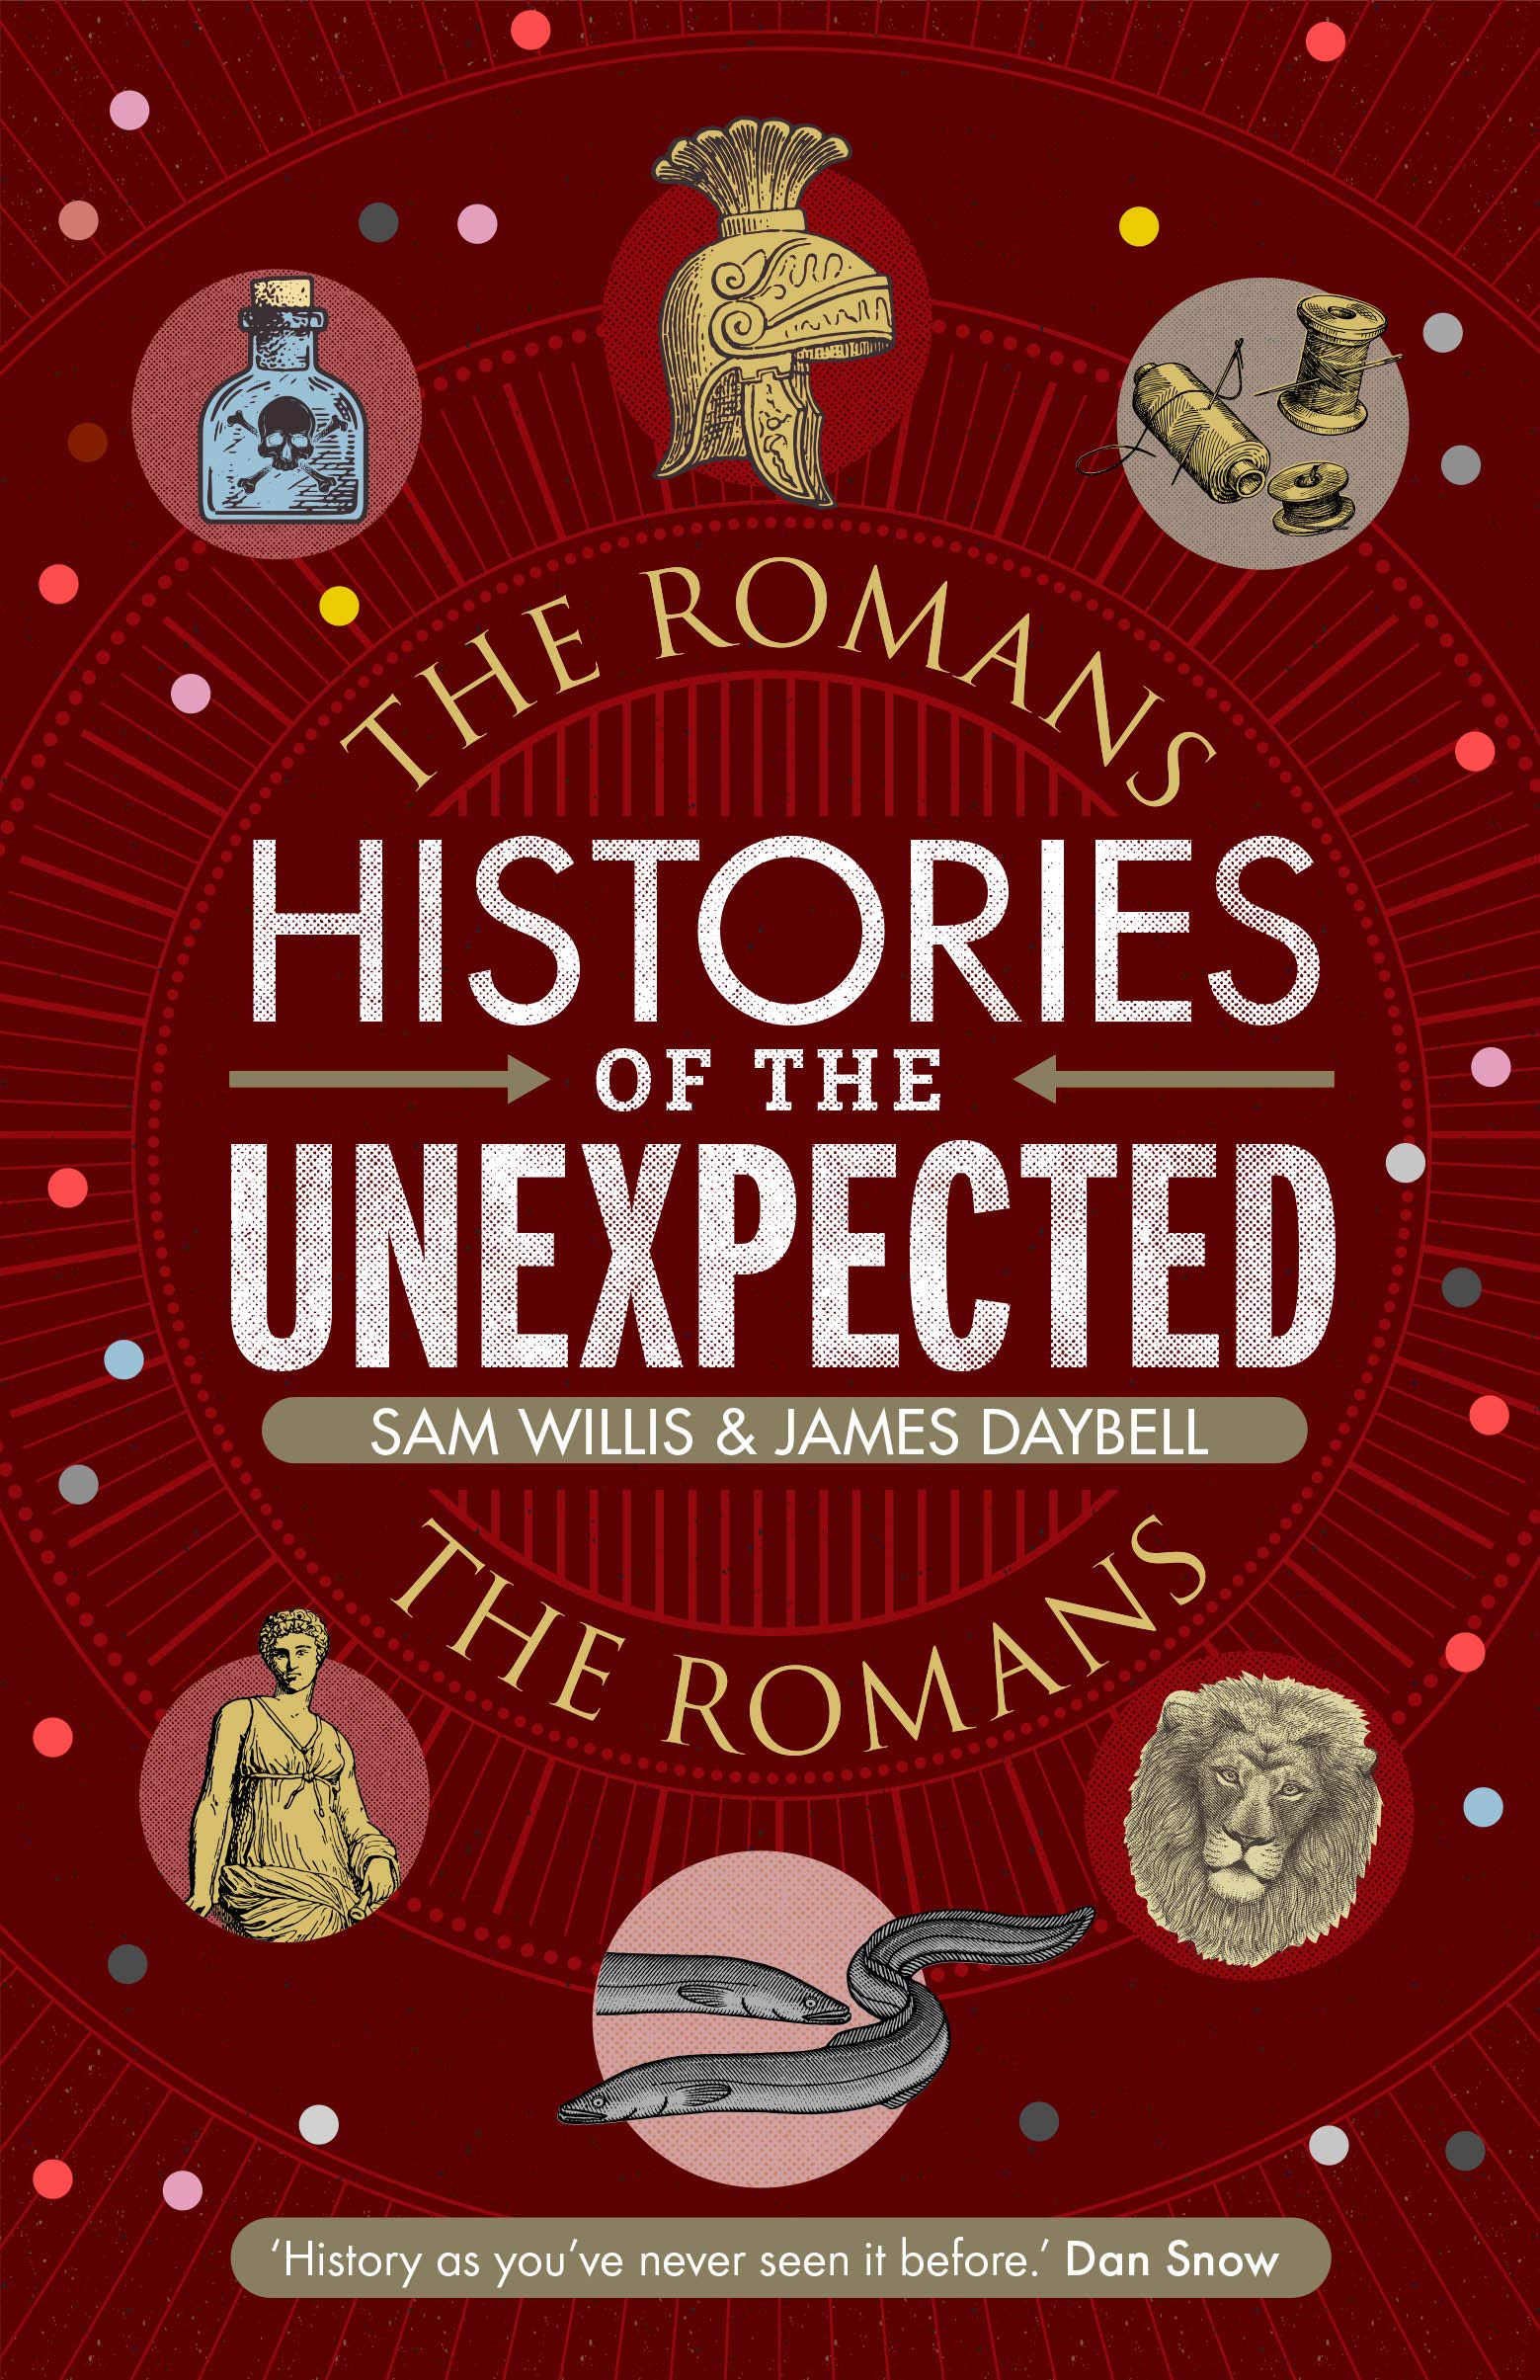 Willis Dr S. Histories of the Unexpected: The Romans 